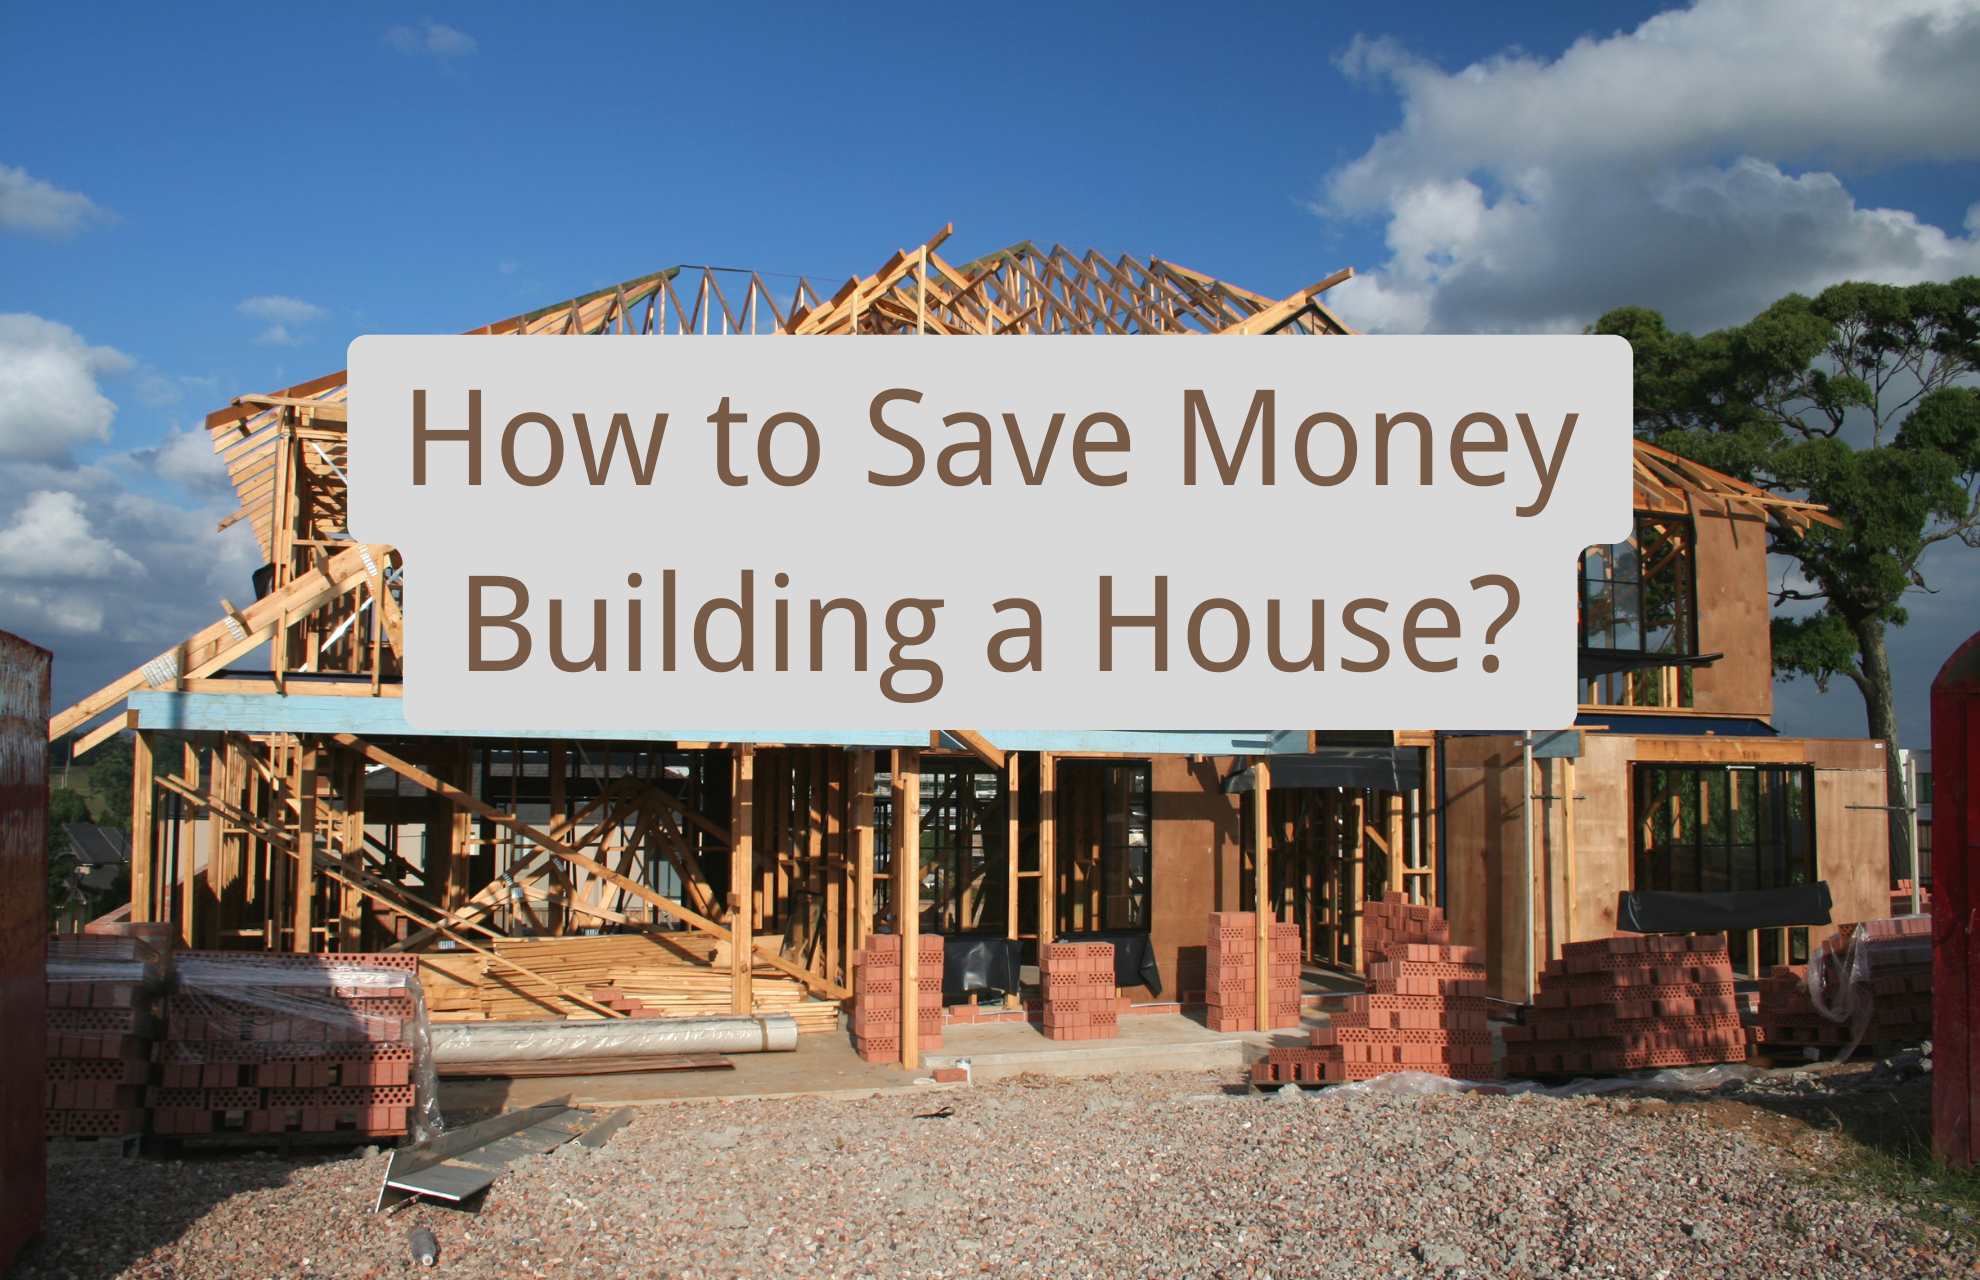 How to Save Money Building a House? 11 Simple Tips